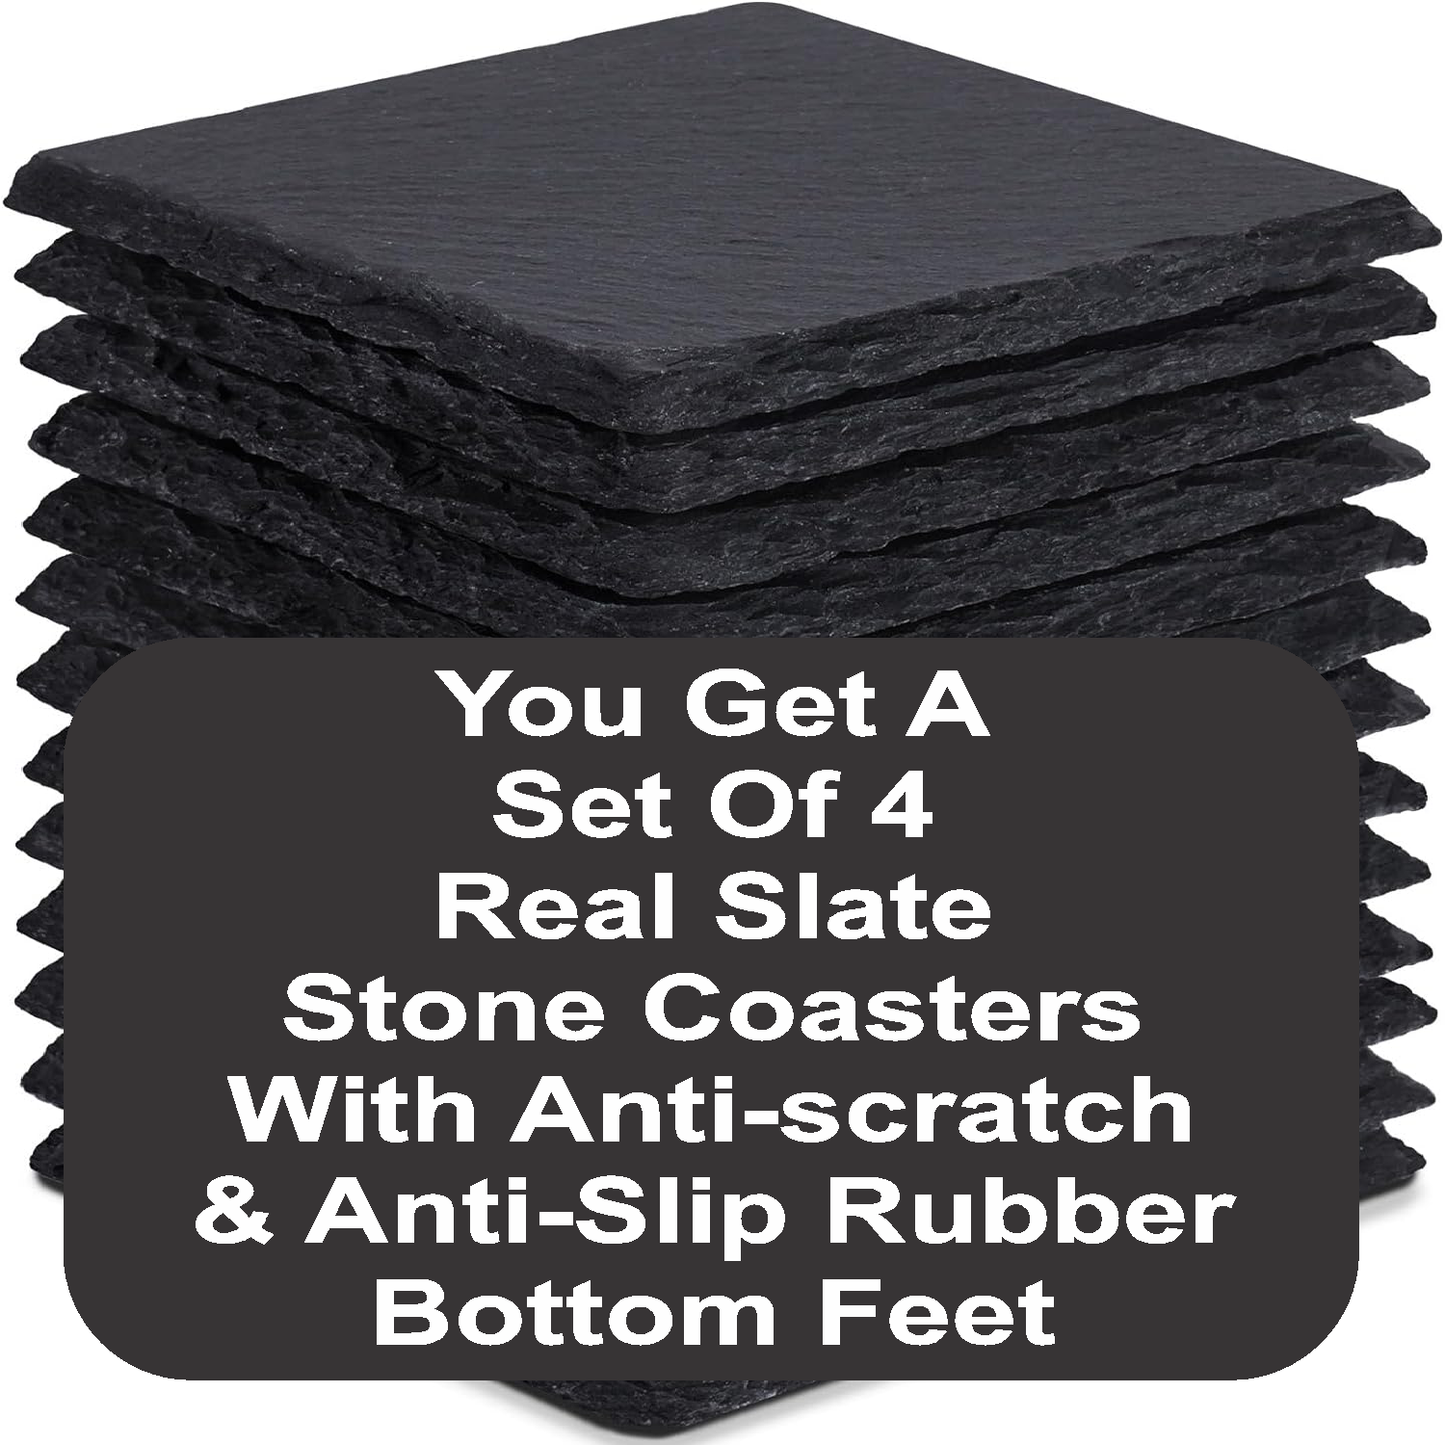 I Only Drink Beer 3 Times A Week - Set of 4 Black Slate Stone Coasters